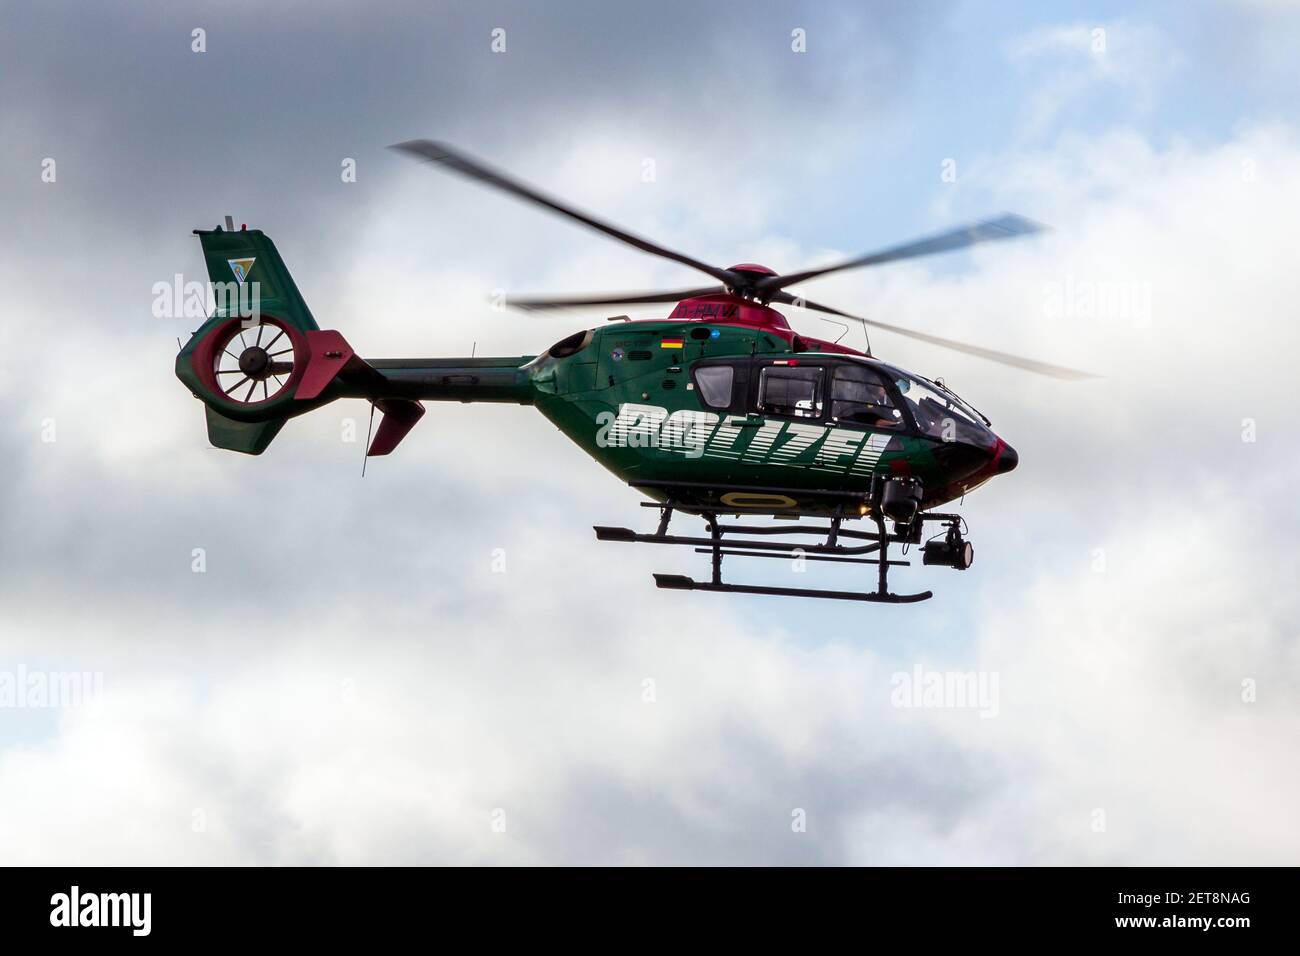 German Police EC-135 helicopter in flight. Laage, Germany - August 23, 2014 Stock Photo